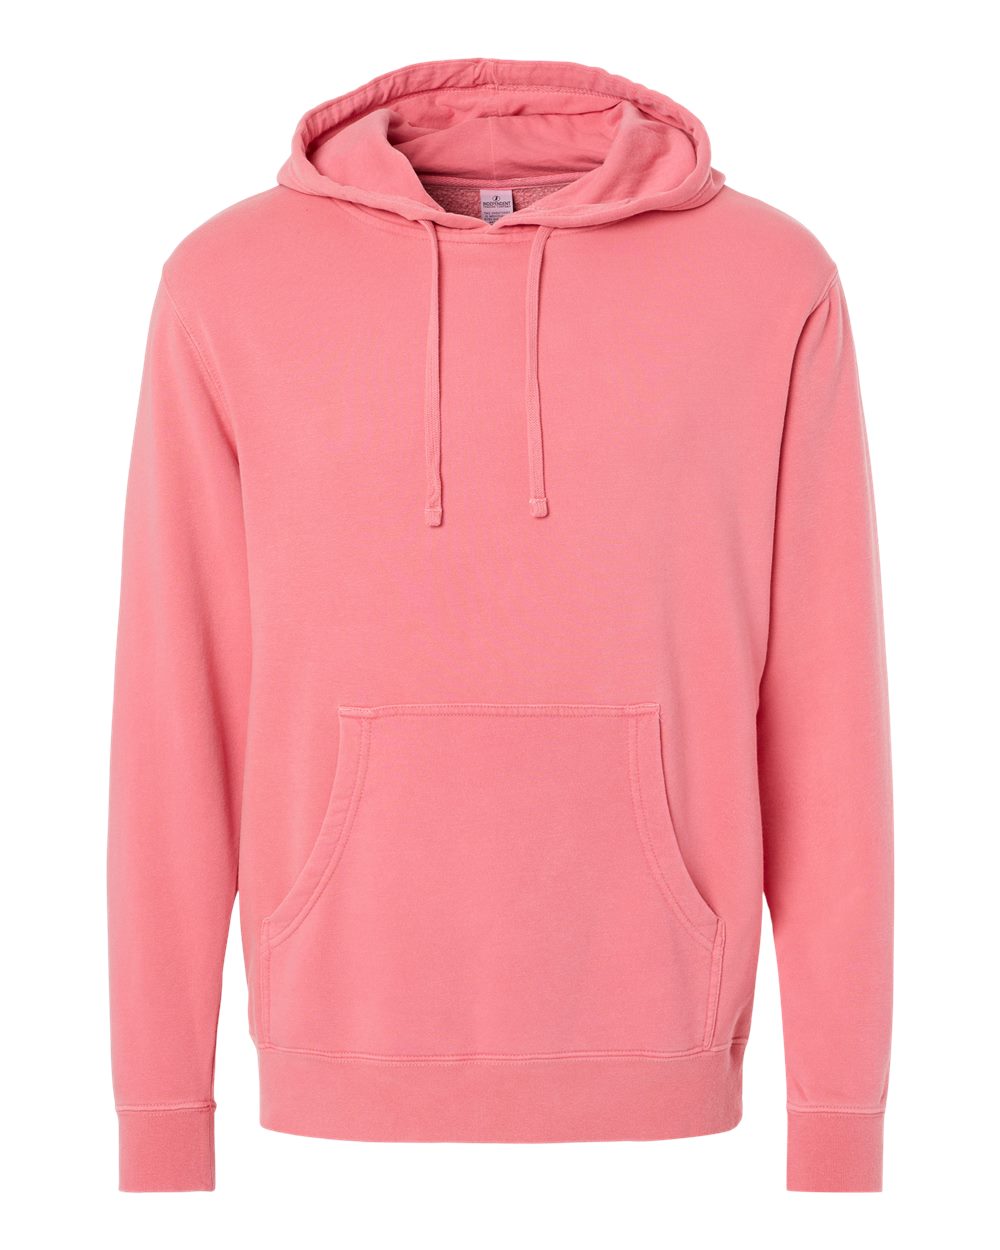 Independent Pigment-Dyed Hoodie (PRM4500) in Pigment Pink